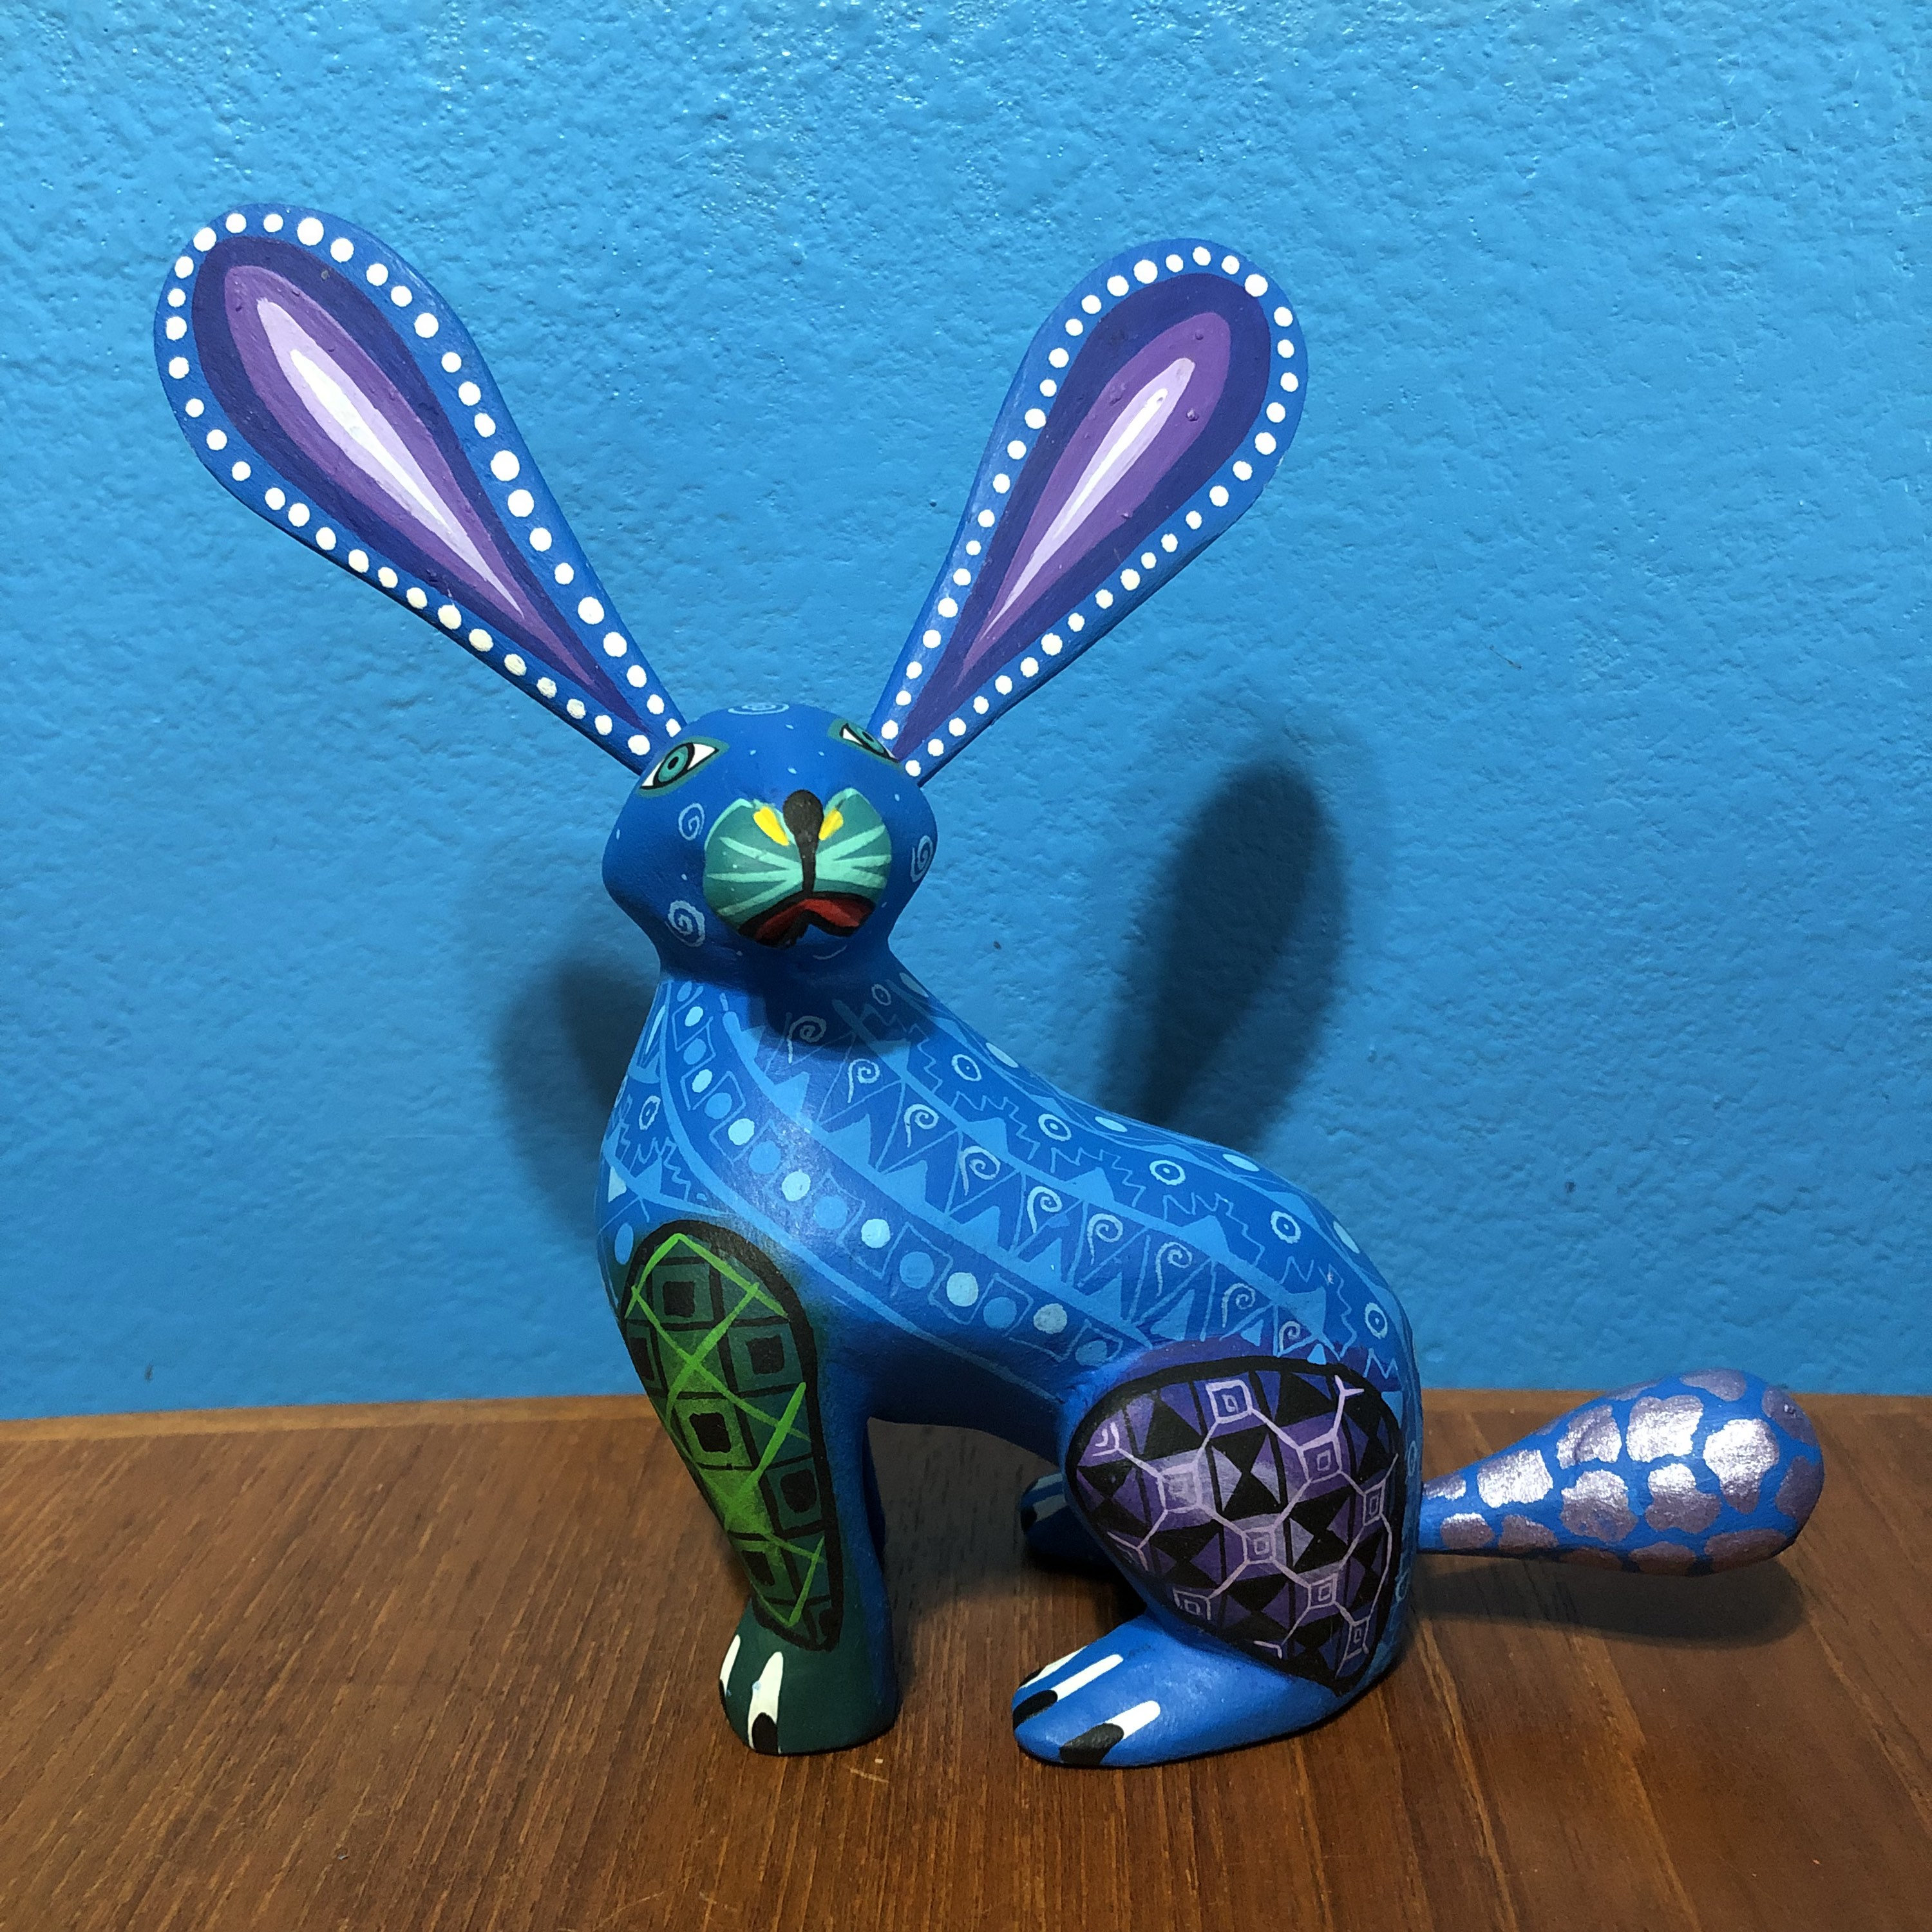 Alebrije Rabbit Handcrafted Wood Carving by Zeny Fuentes & Reyna Piña from Oaxaca Mexico.